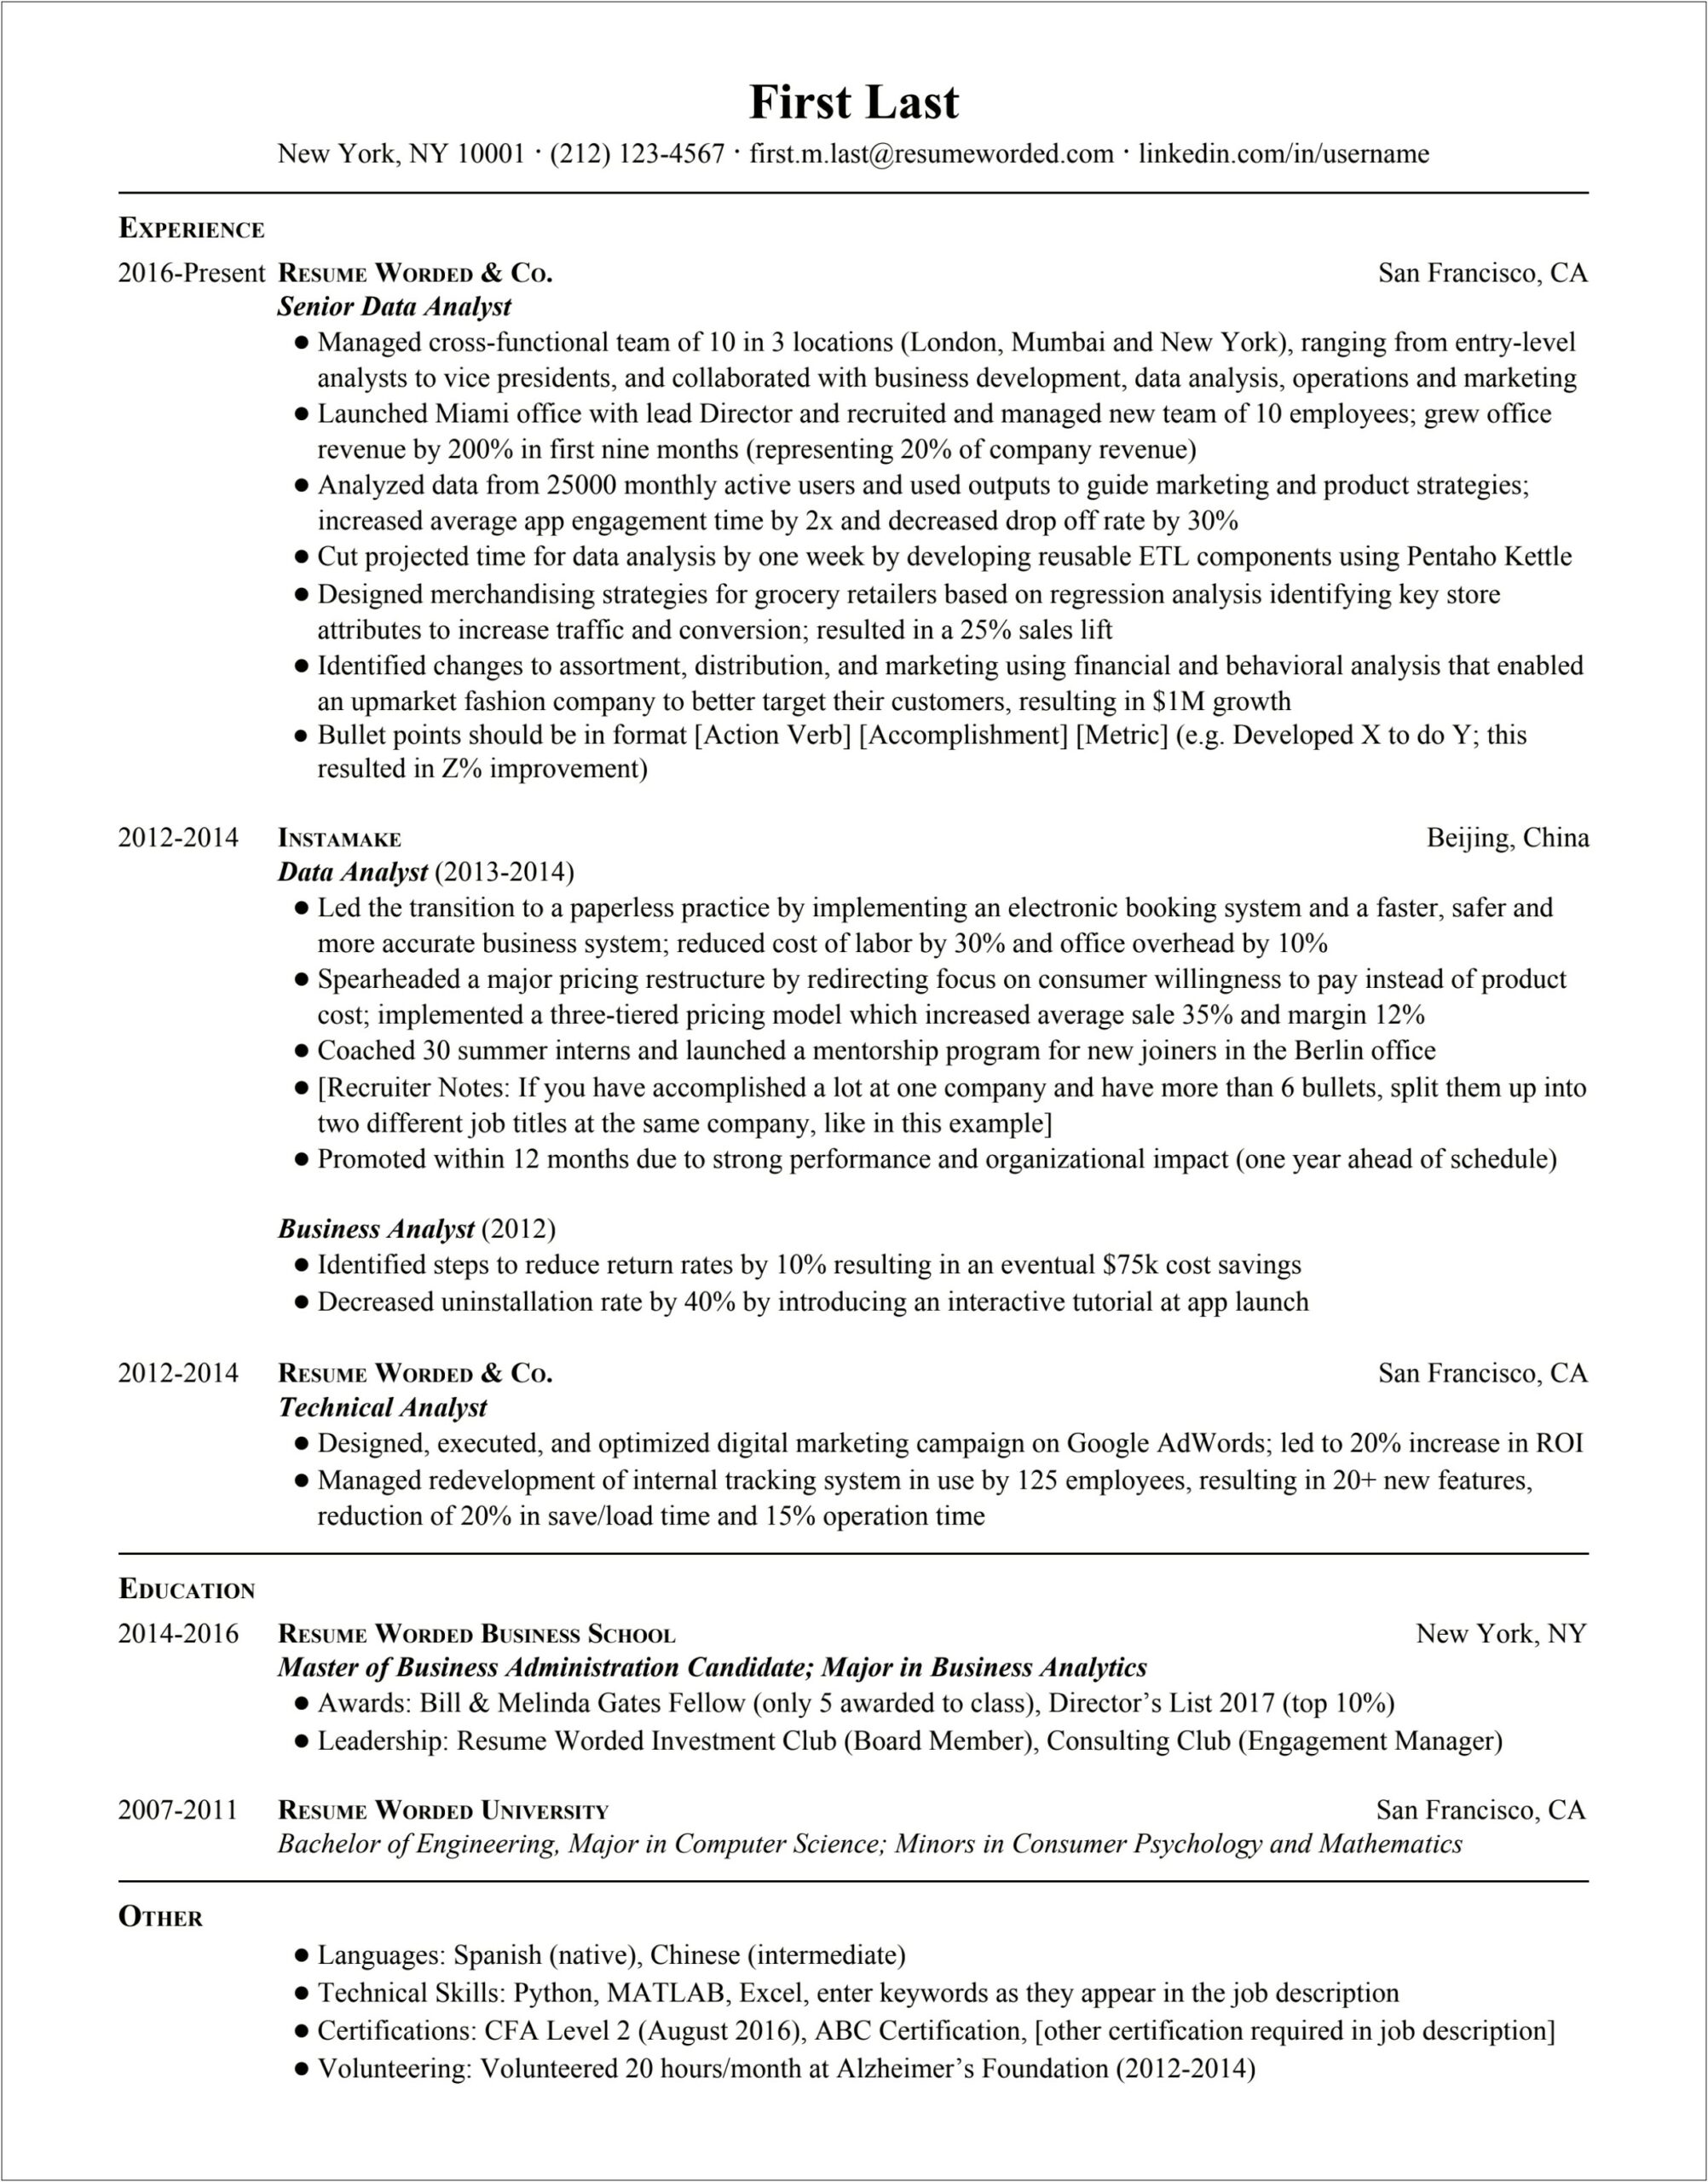 Clinical Data Specialist Resume Sample